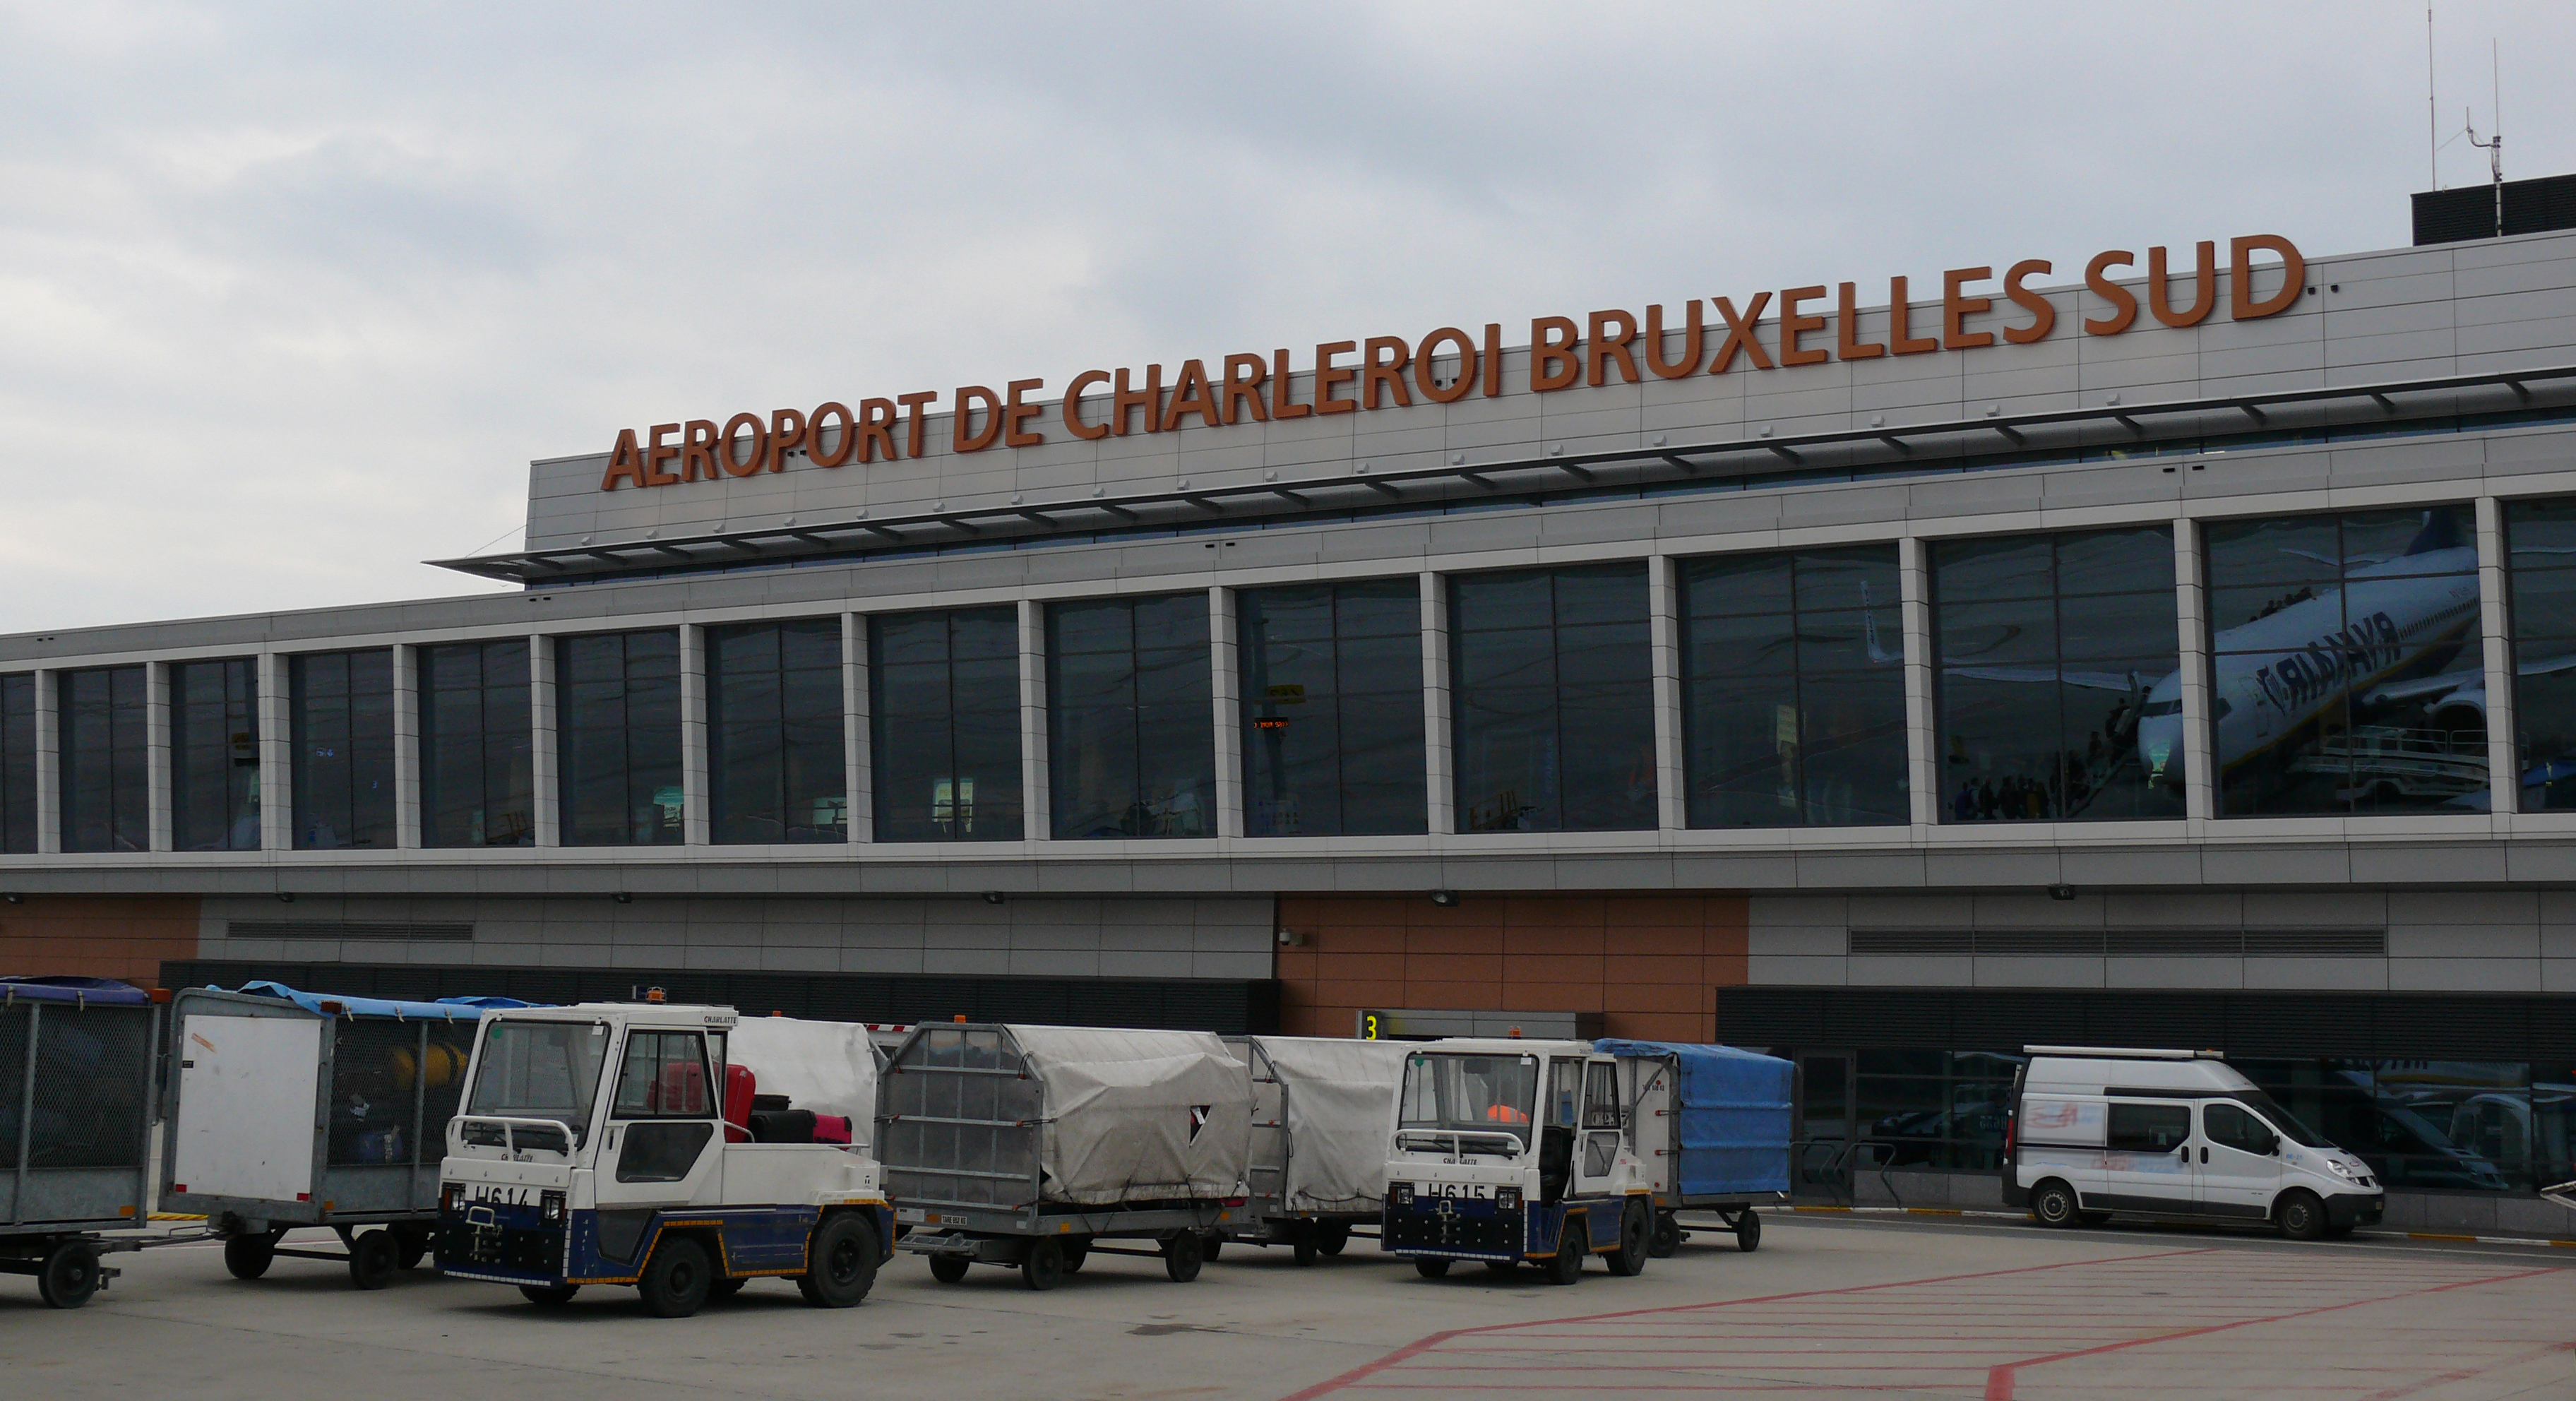 Charleroi brussels south main hall